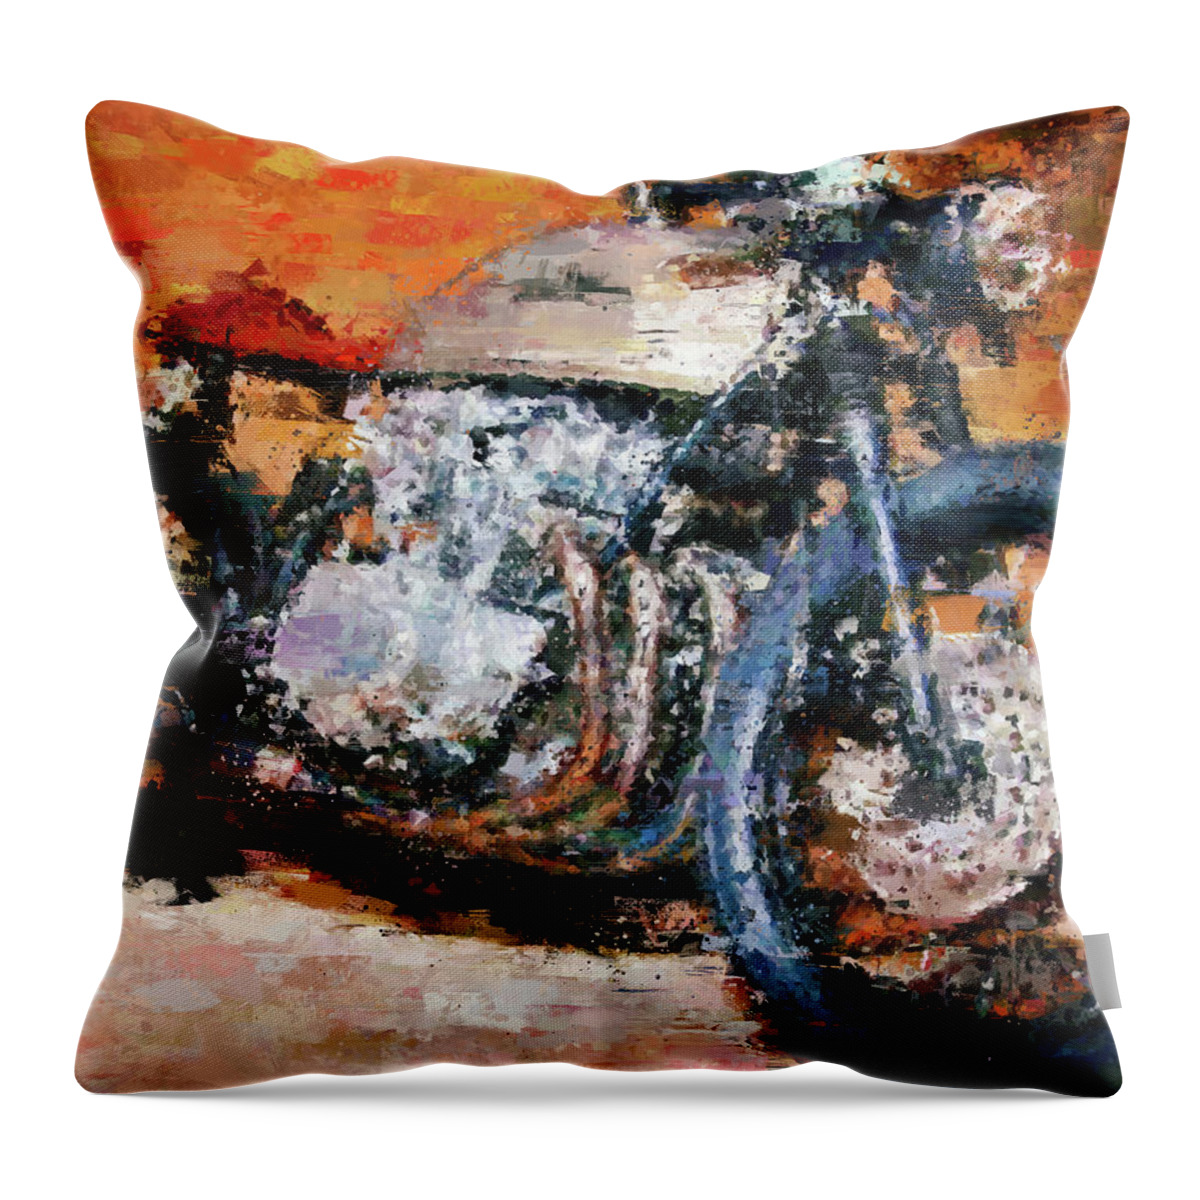 Motorcycle Throw Pillow featuring the painting Cafe Racer Motorcycle by Vart by Vart